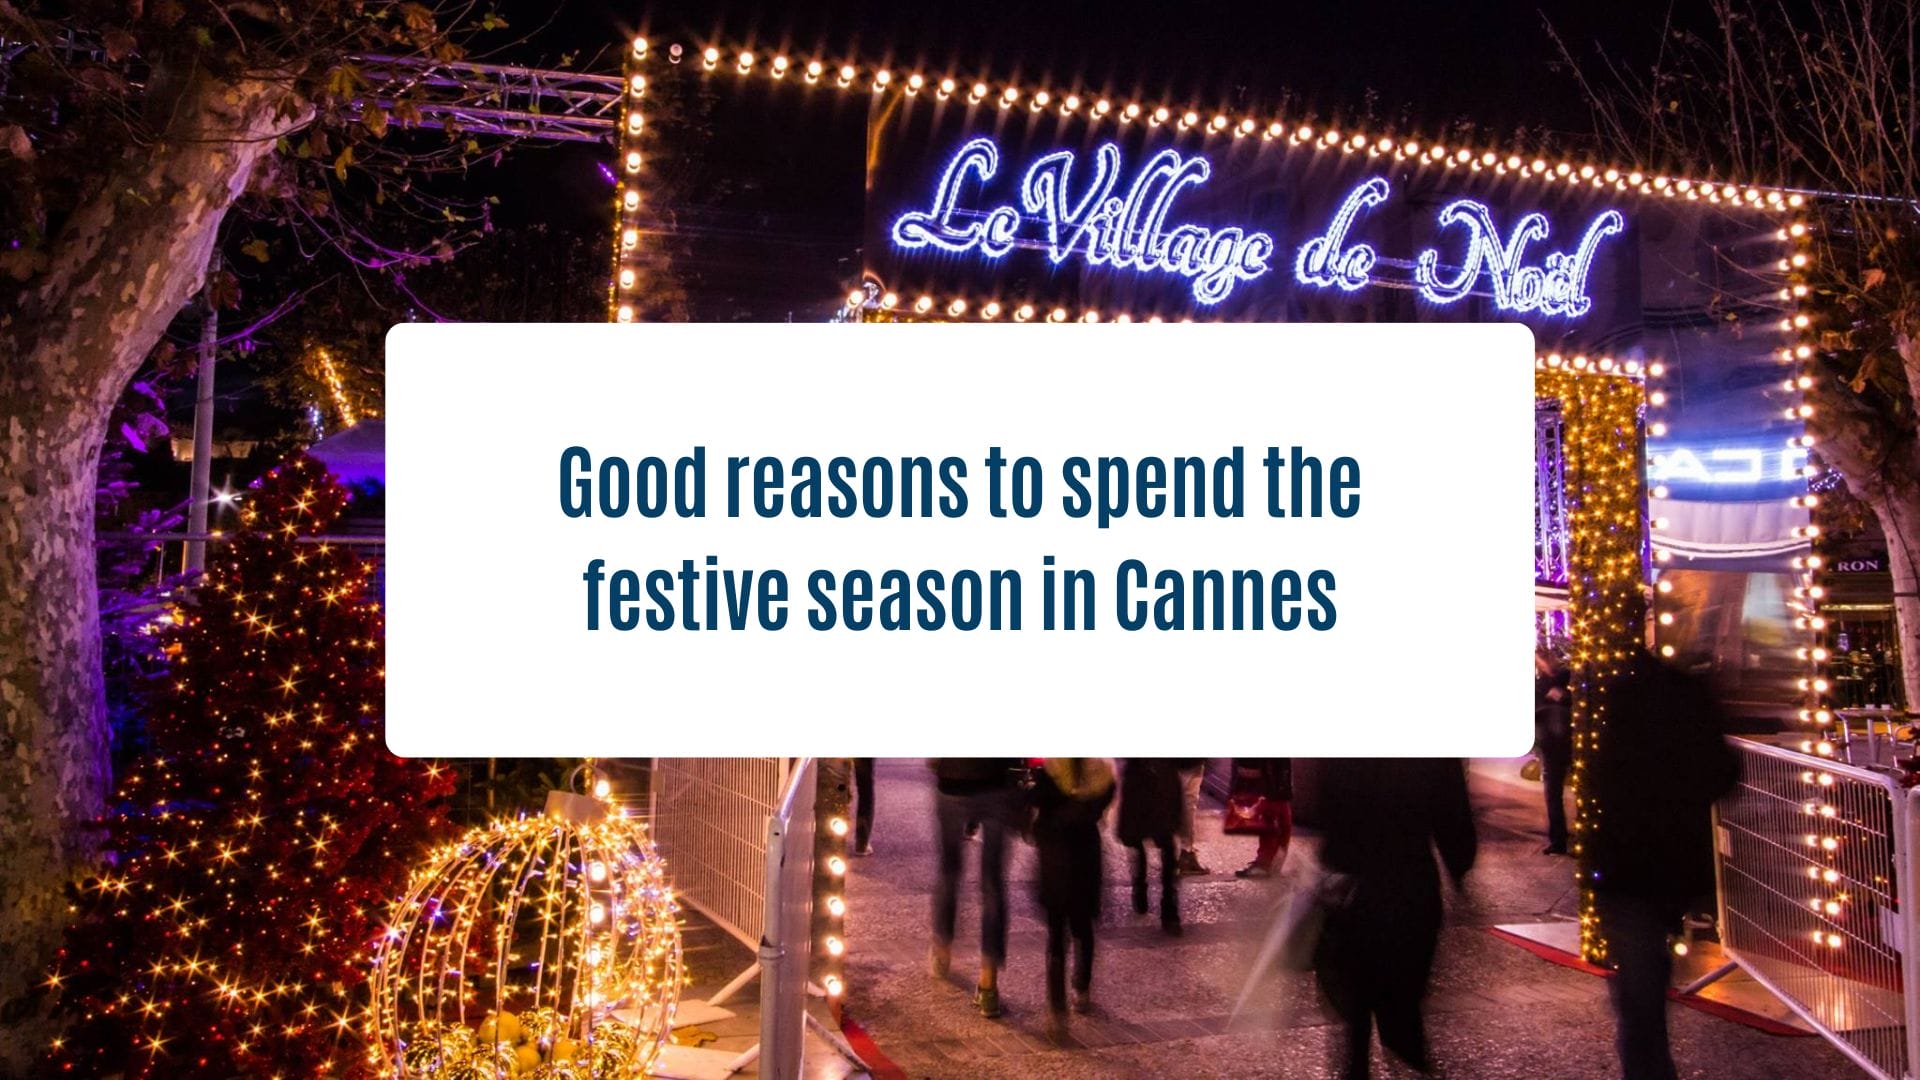 News Olam Properties - Good reasons to spend the festive season in Cannes